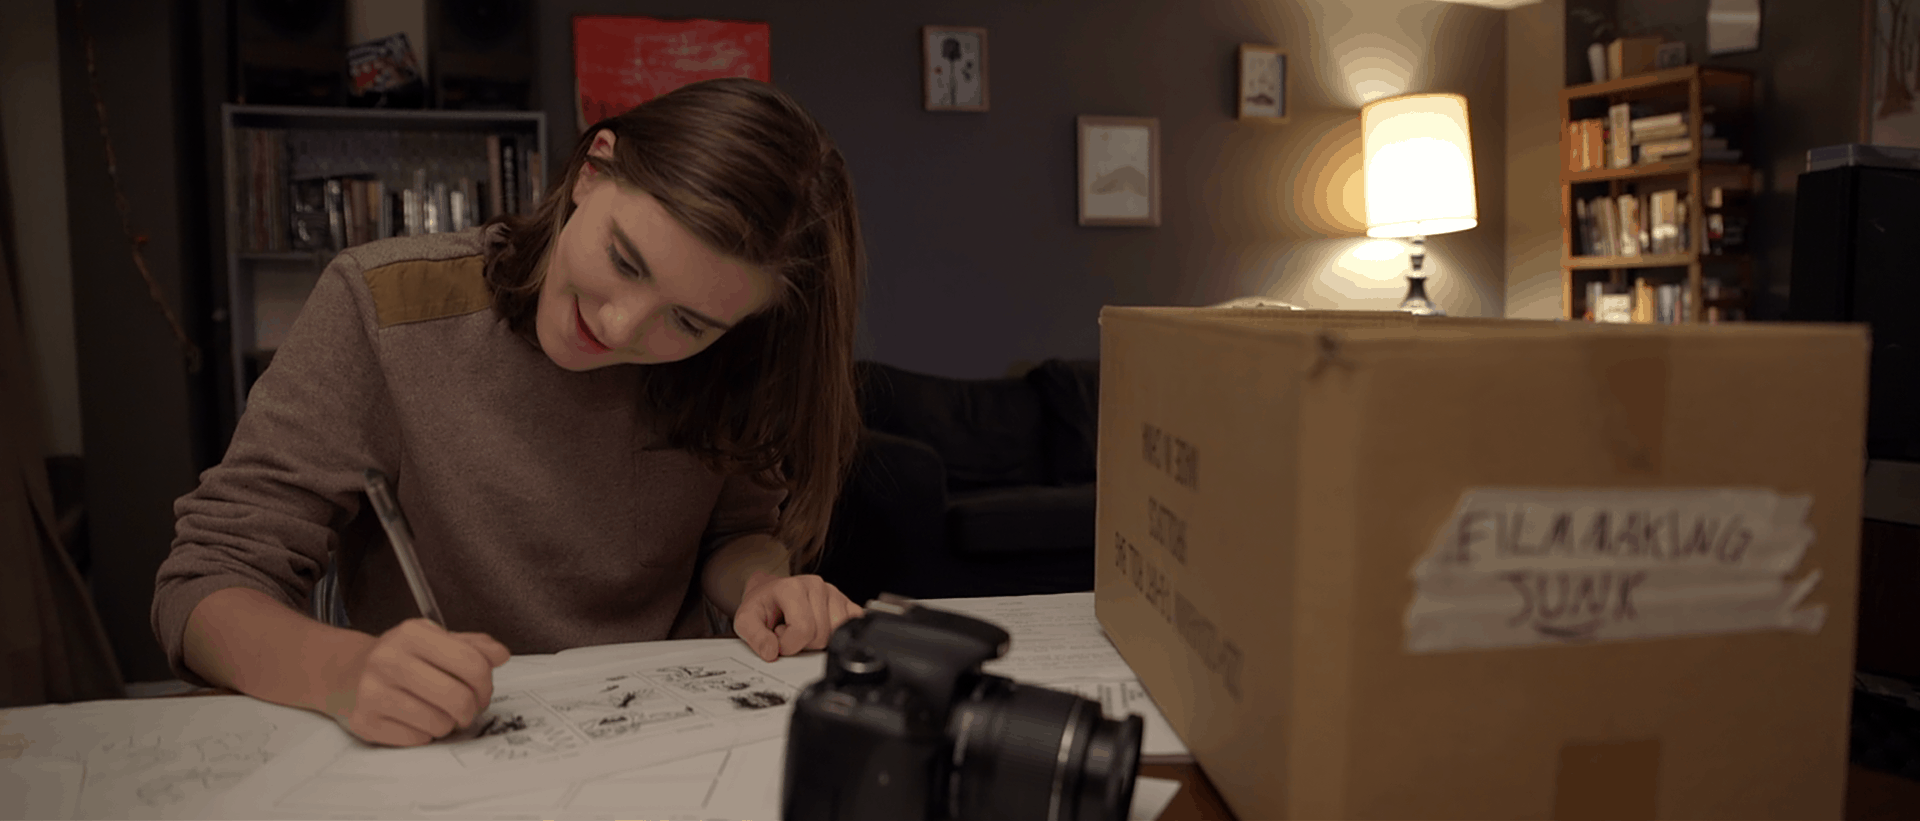 Interview Haley Walker, Actor, Impossible Horror - Haley sits at a table working on storyboards as her character Lily in Impossible Horror. A box sits to her right labelled "Film Stuff". A DSLR camera sits on the table in front of her.